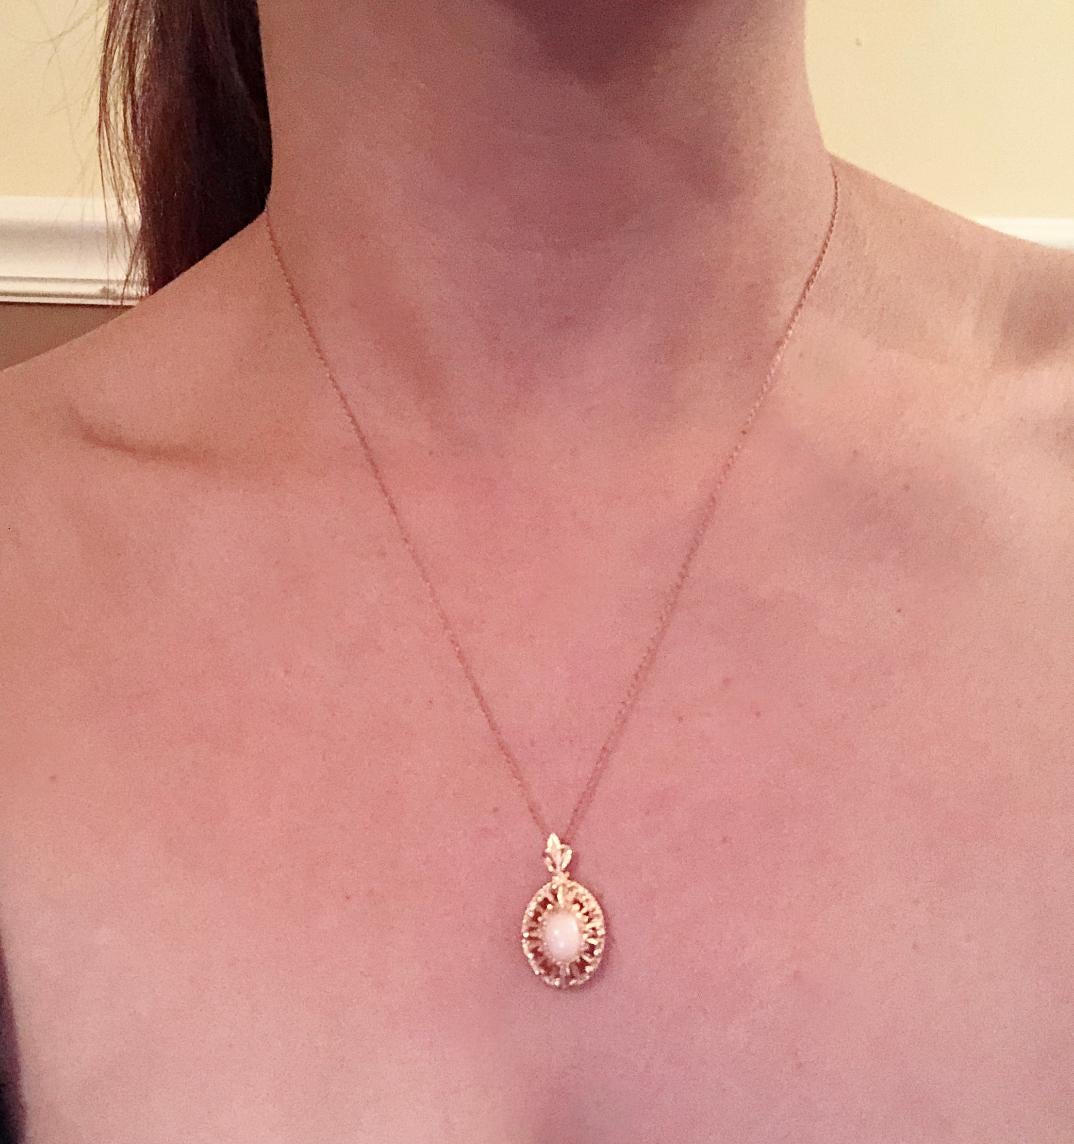 14 Karat Yellow Gold Necklace with Pendant In Good Condition For Sale In Stamford, CT